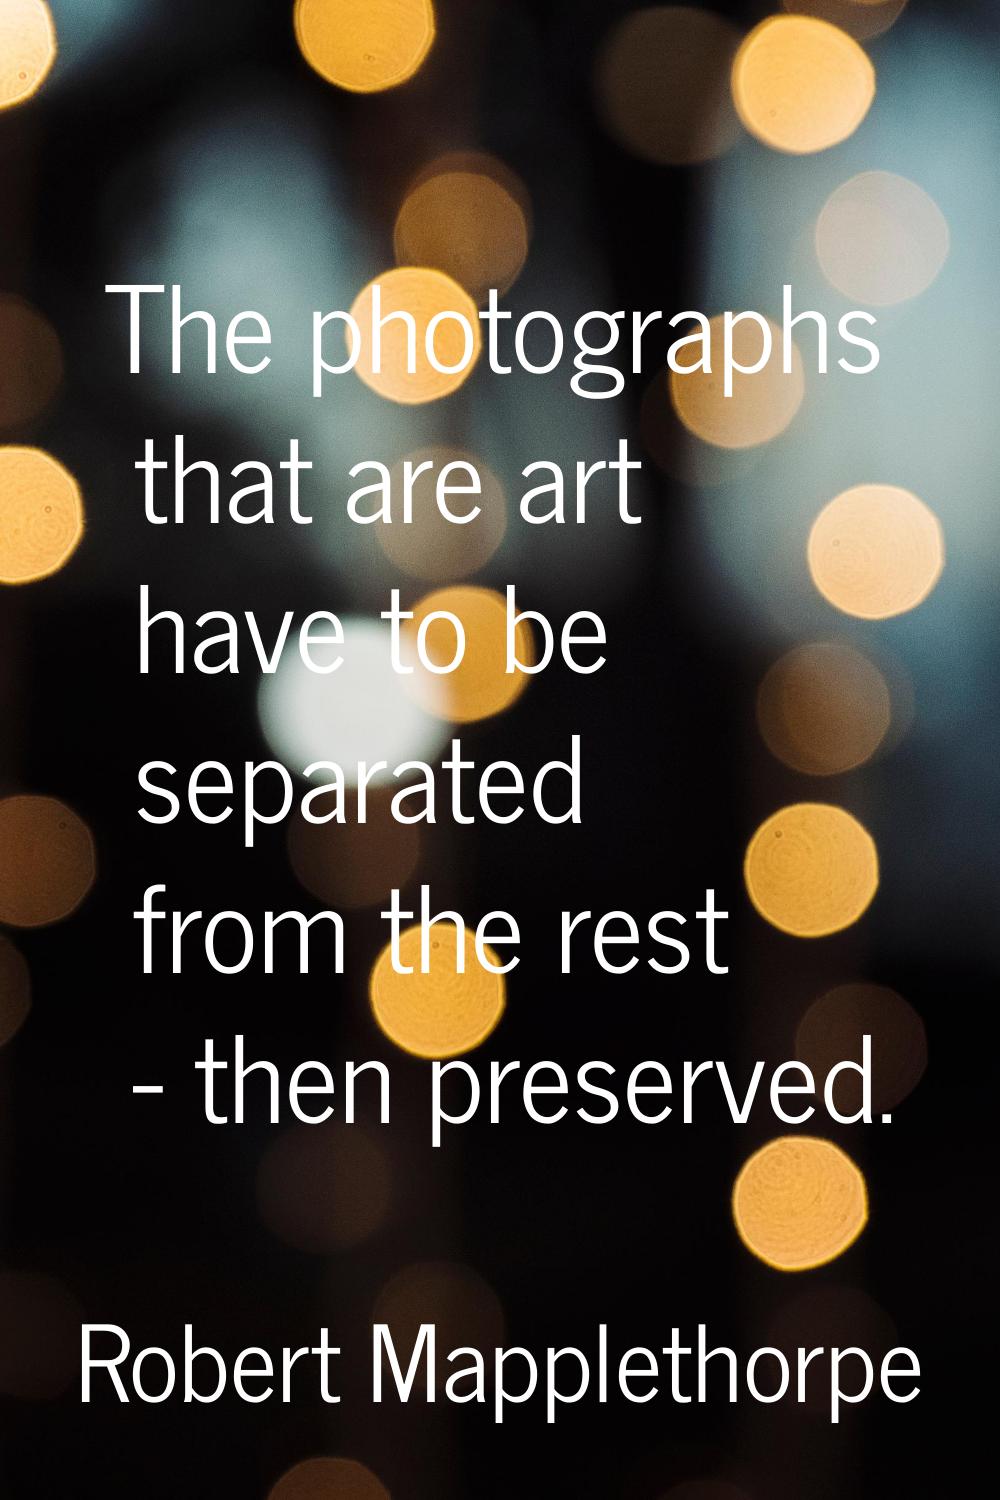 The photographs that are art have to be separated from the rest - then preserved.